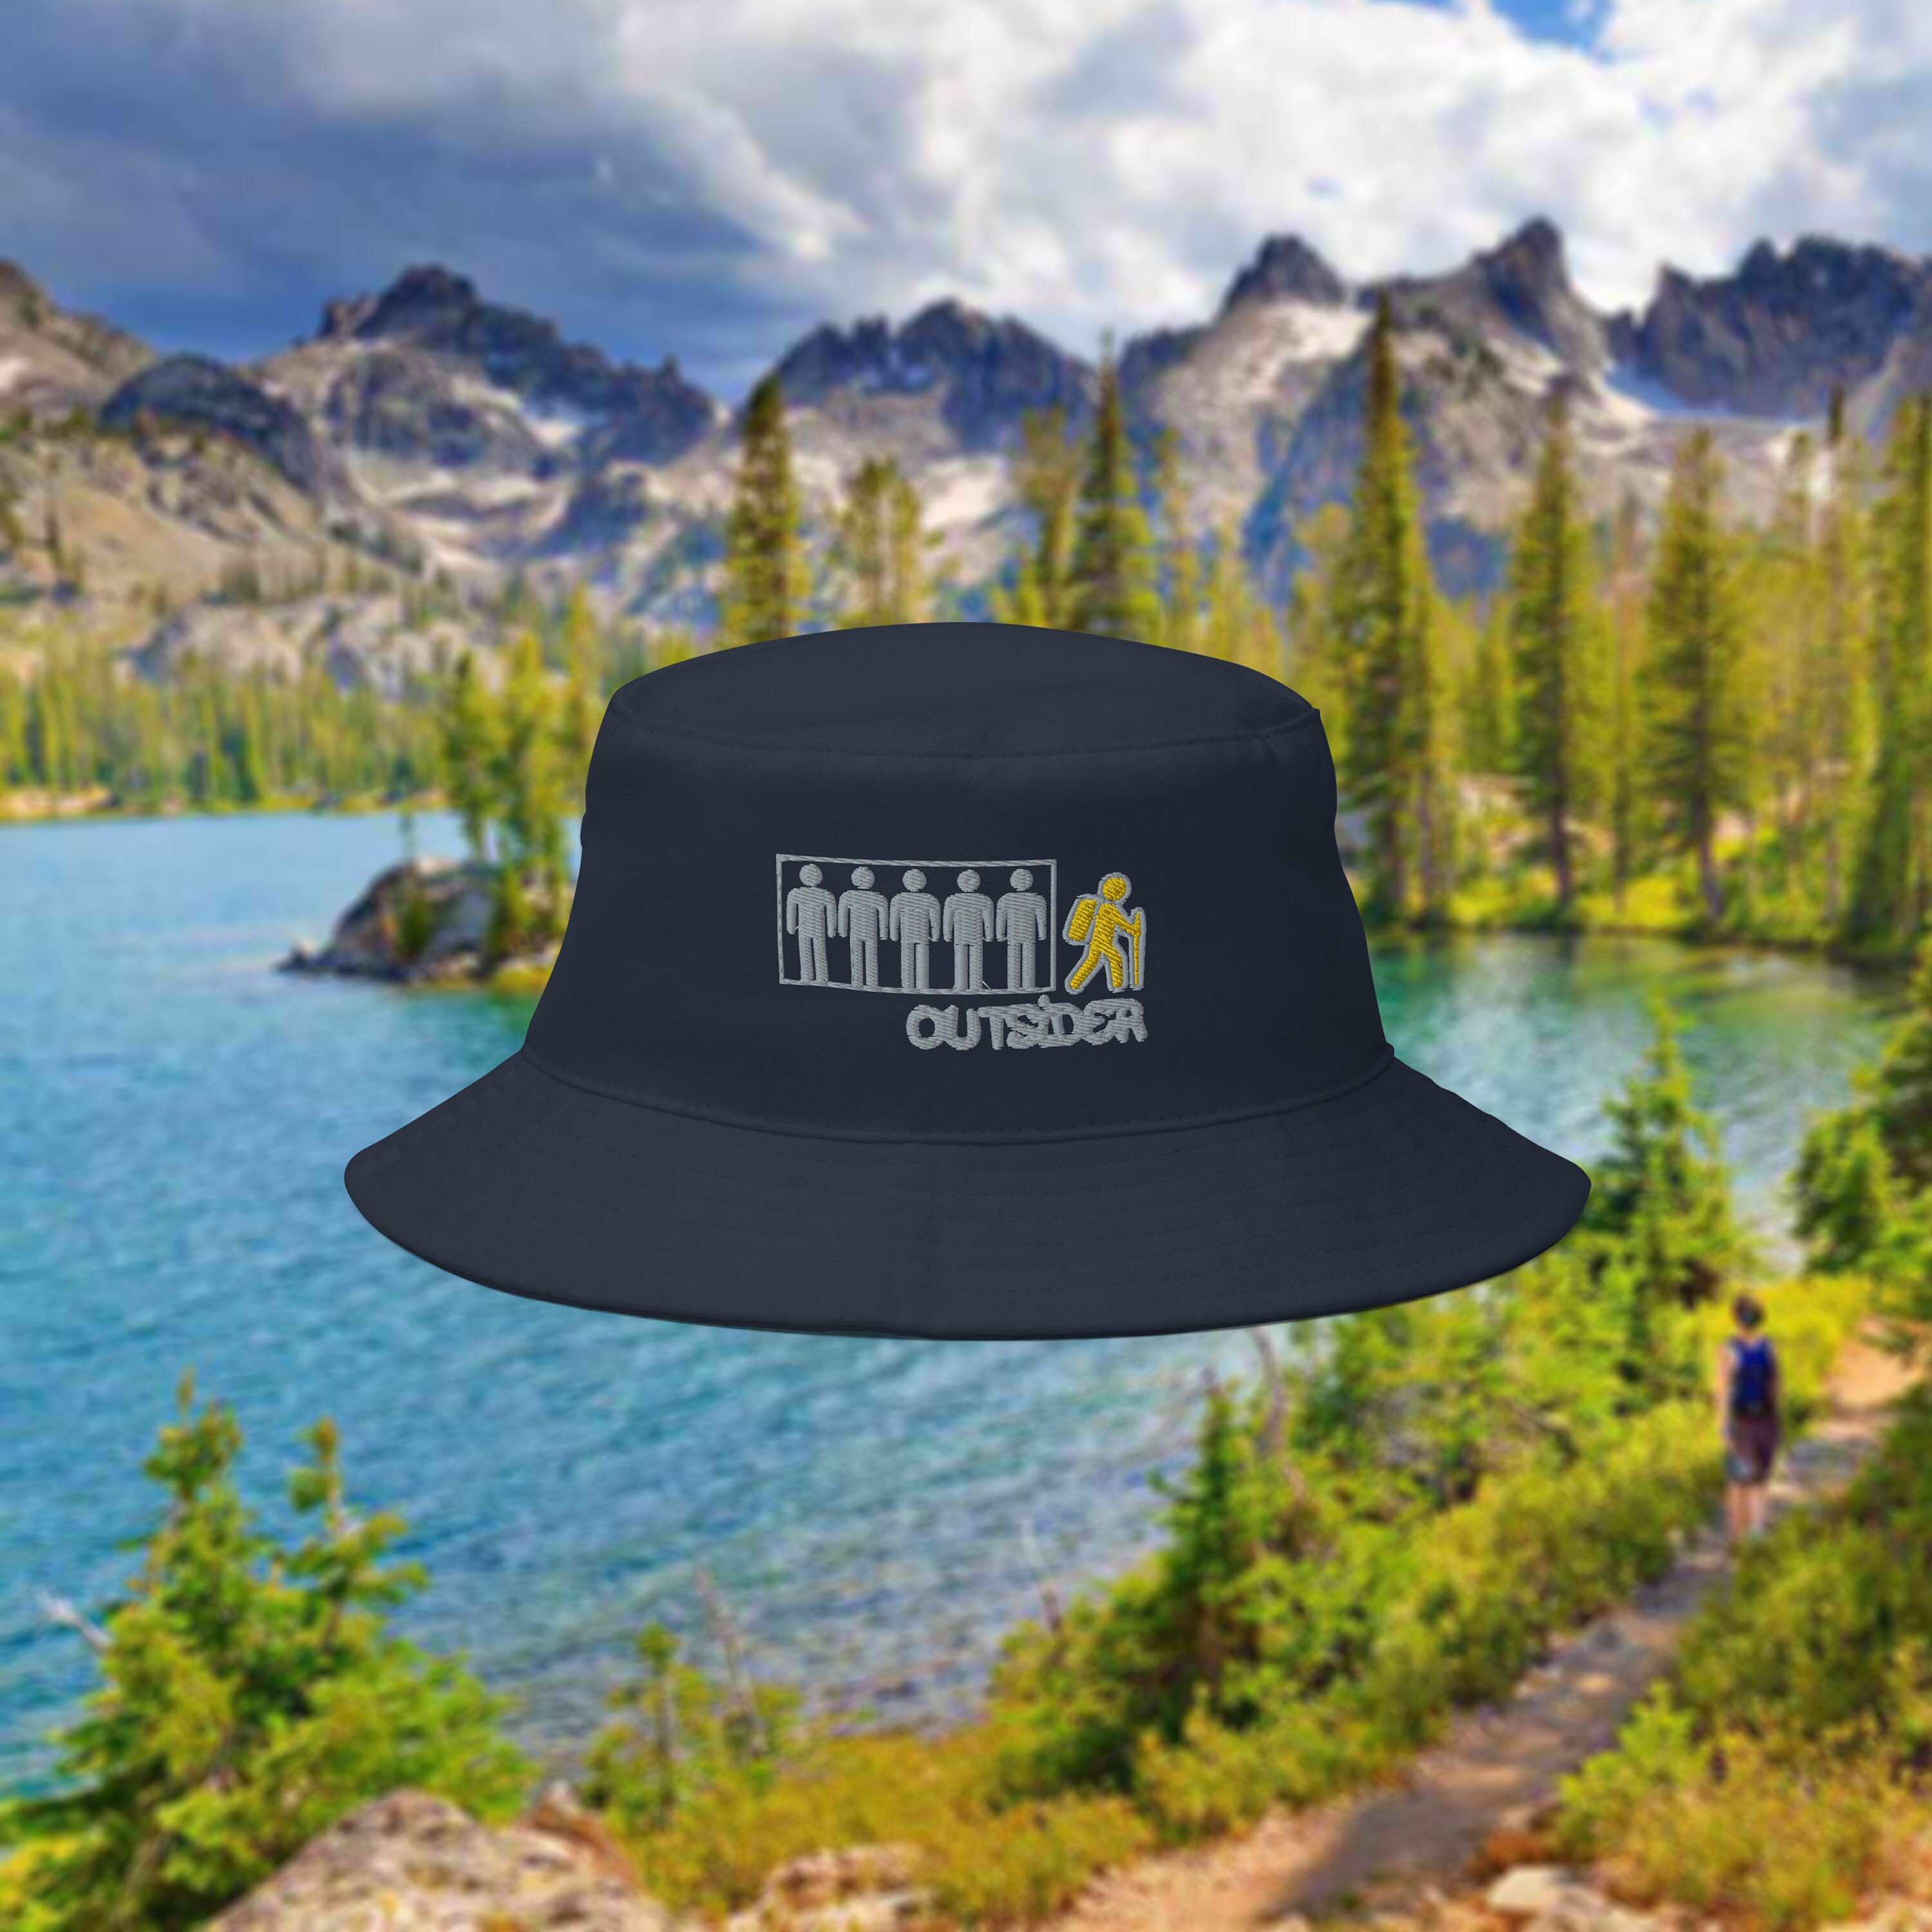 Outsider Bucket Hat, Trail Hiking, Outdoors, Mountains, Nature